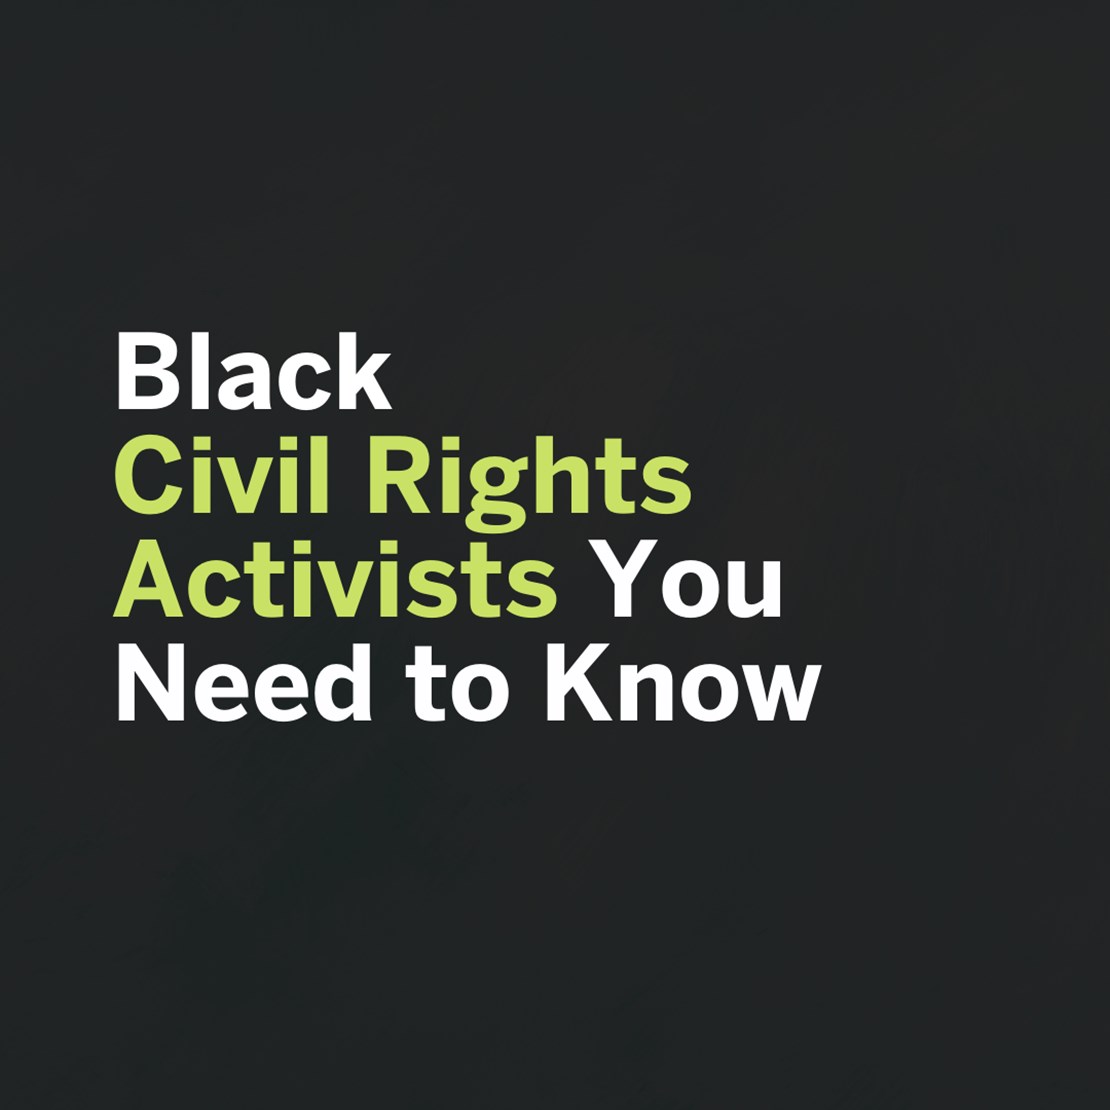 Black Civil Rights Activists You Need to Know